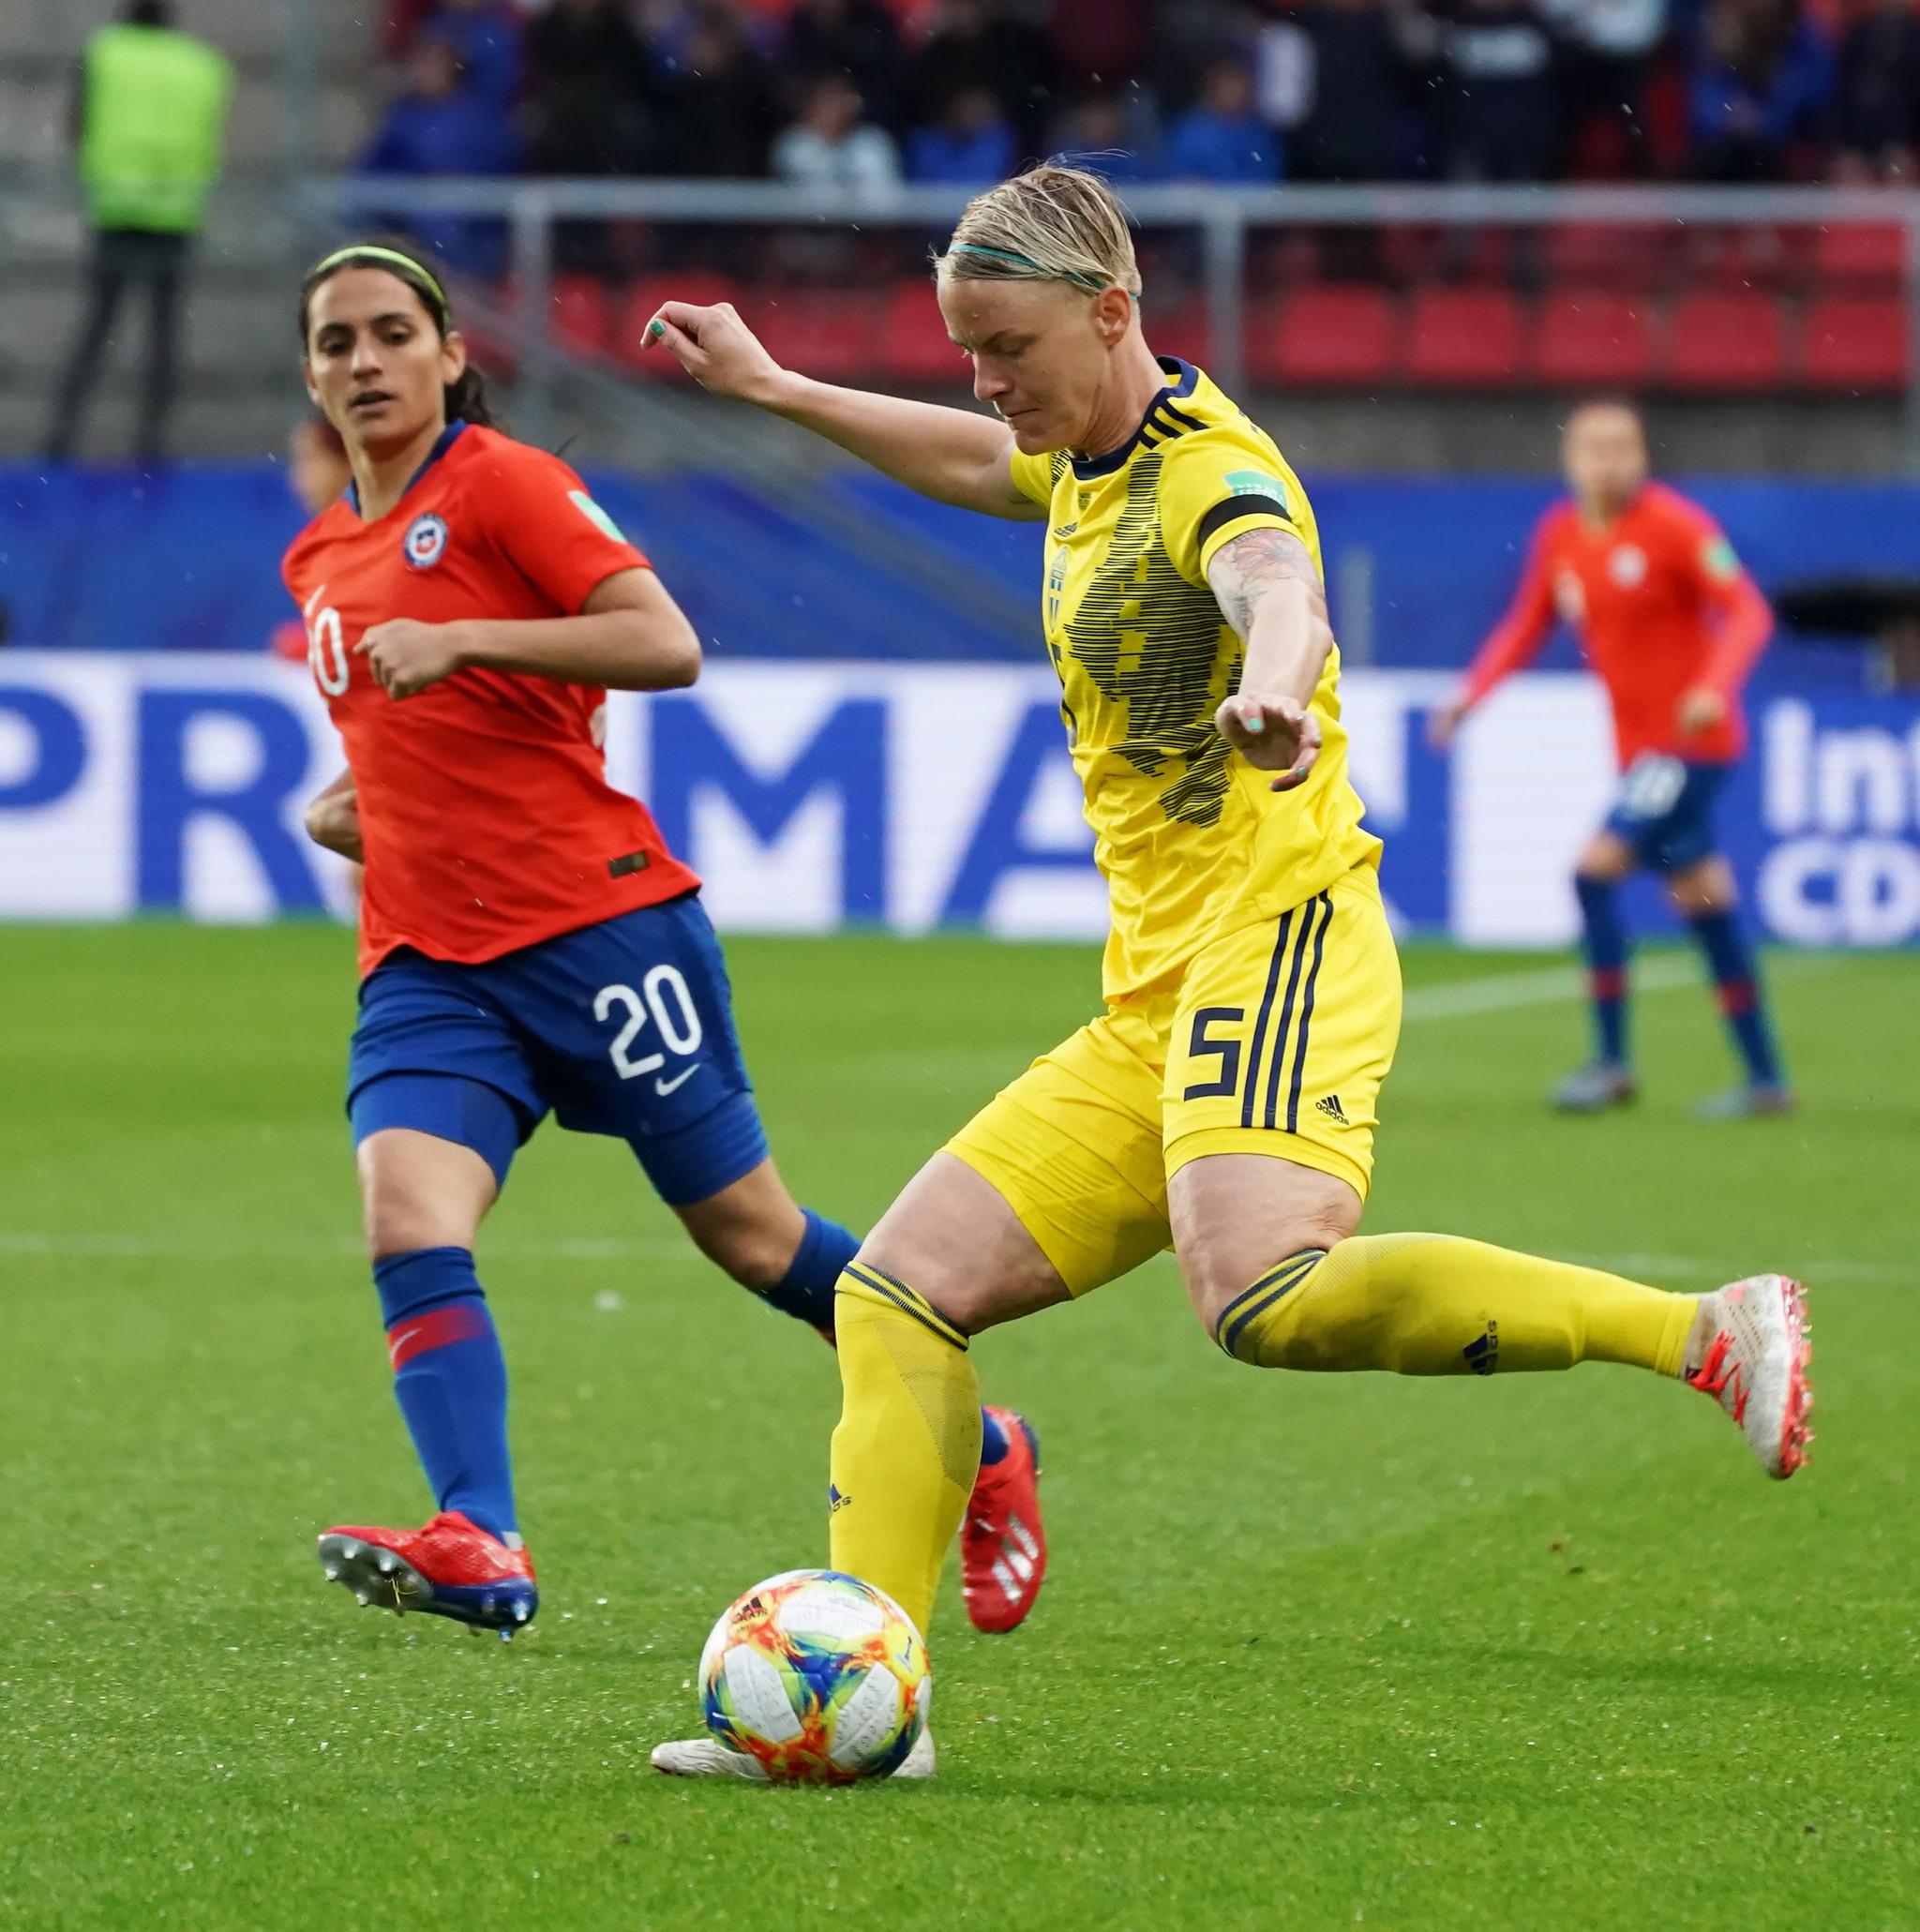 Nilla Fischer on a football field, about to kick the ball. Two other players seen in the background.